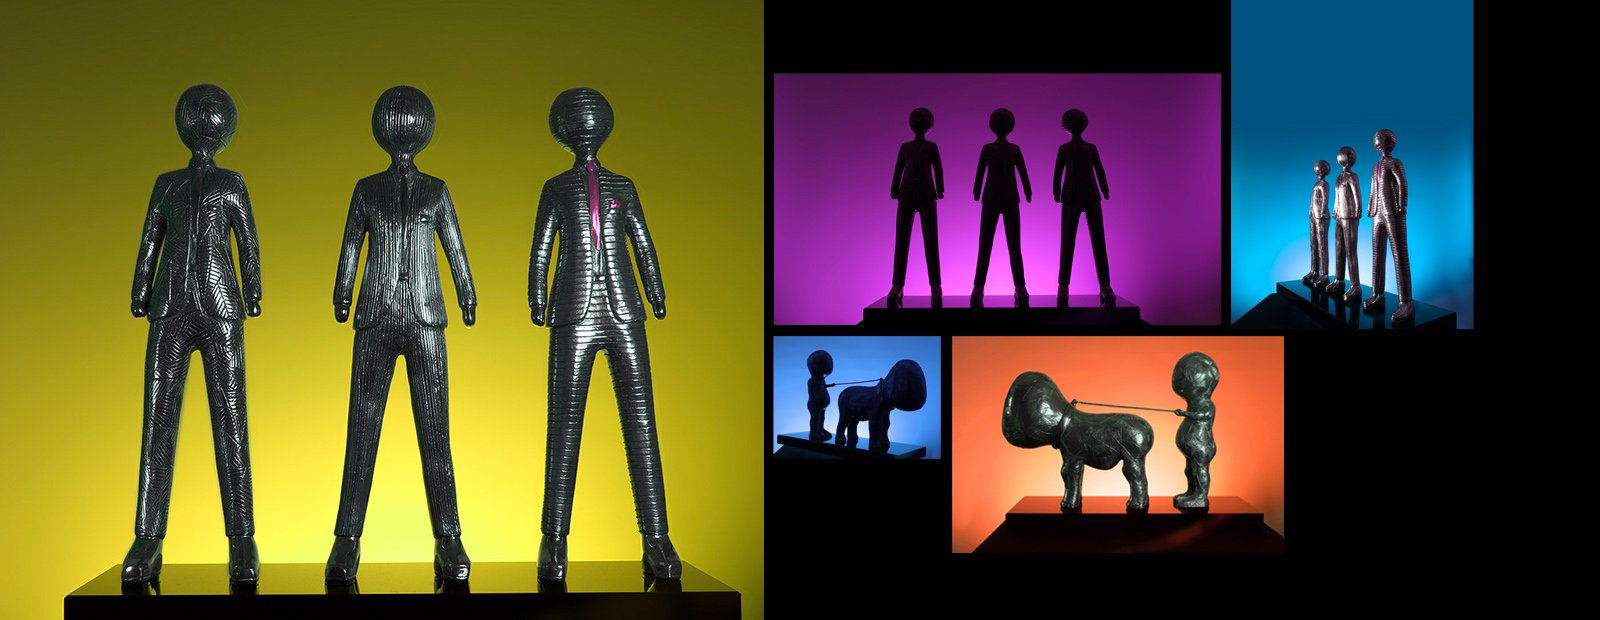 Billy Connolly's  2021 collection of sculptures, including 'Walkies' and 'Pink Tie & Hanky'